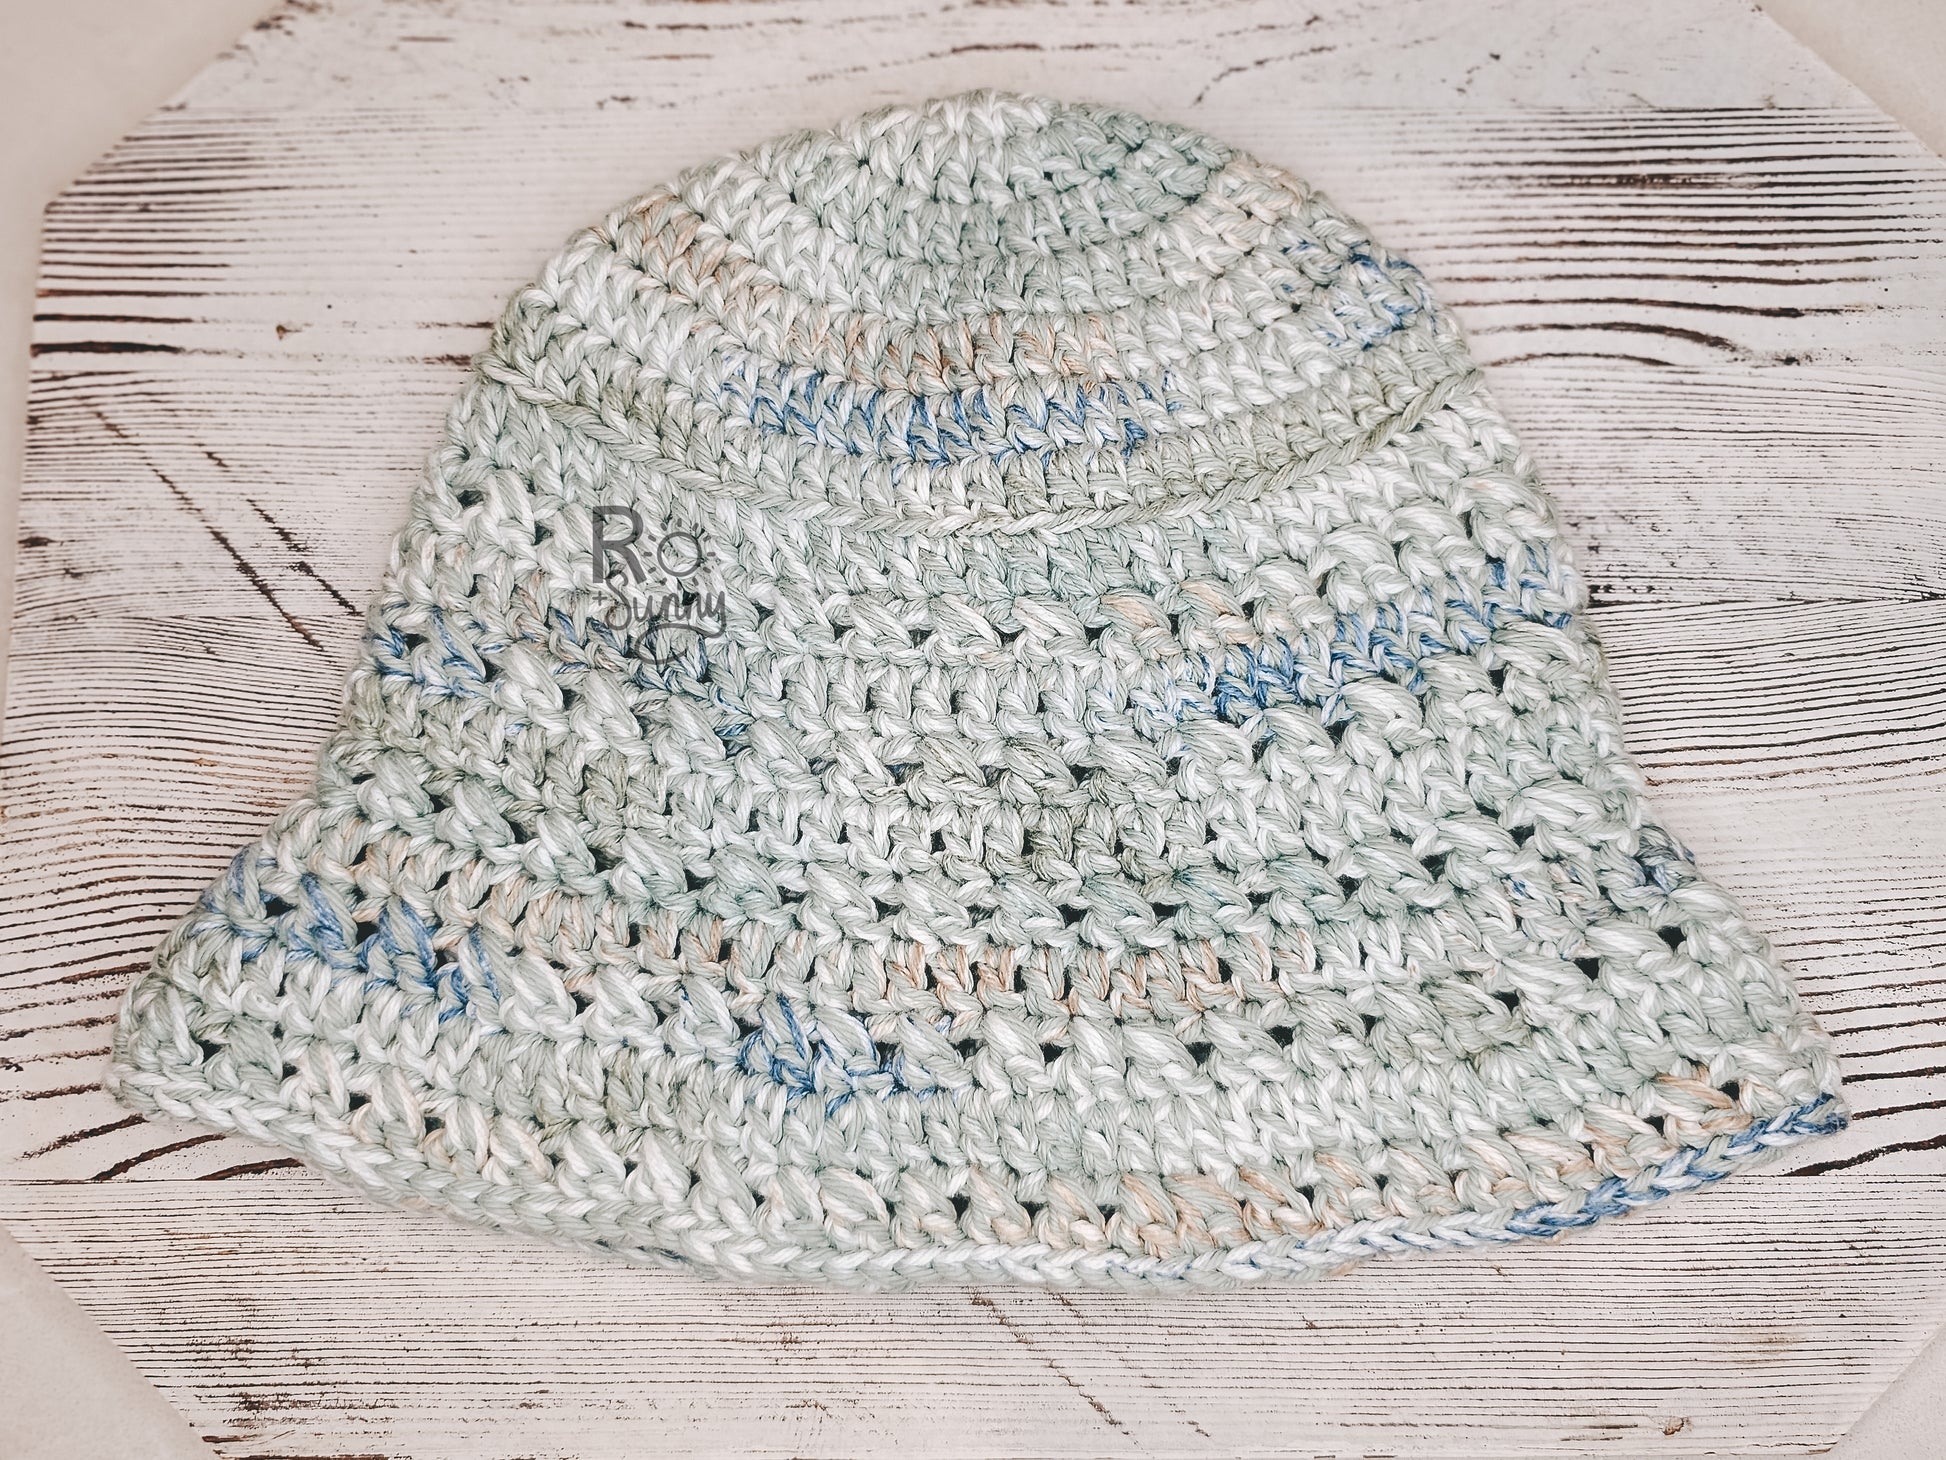 Bucket Hat in the color Seaside - Varieagated Blue, Green, White, Tan